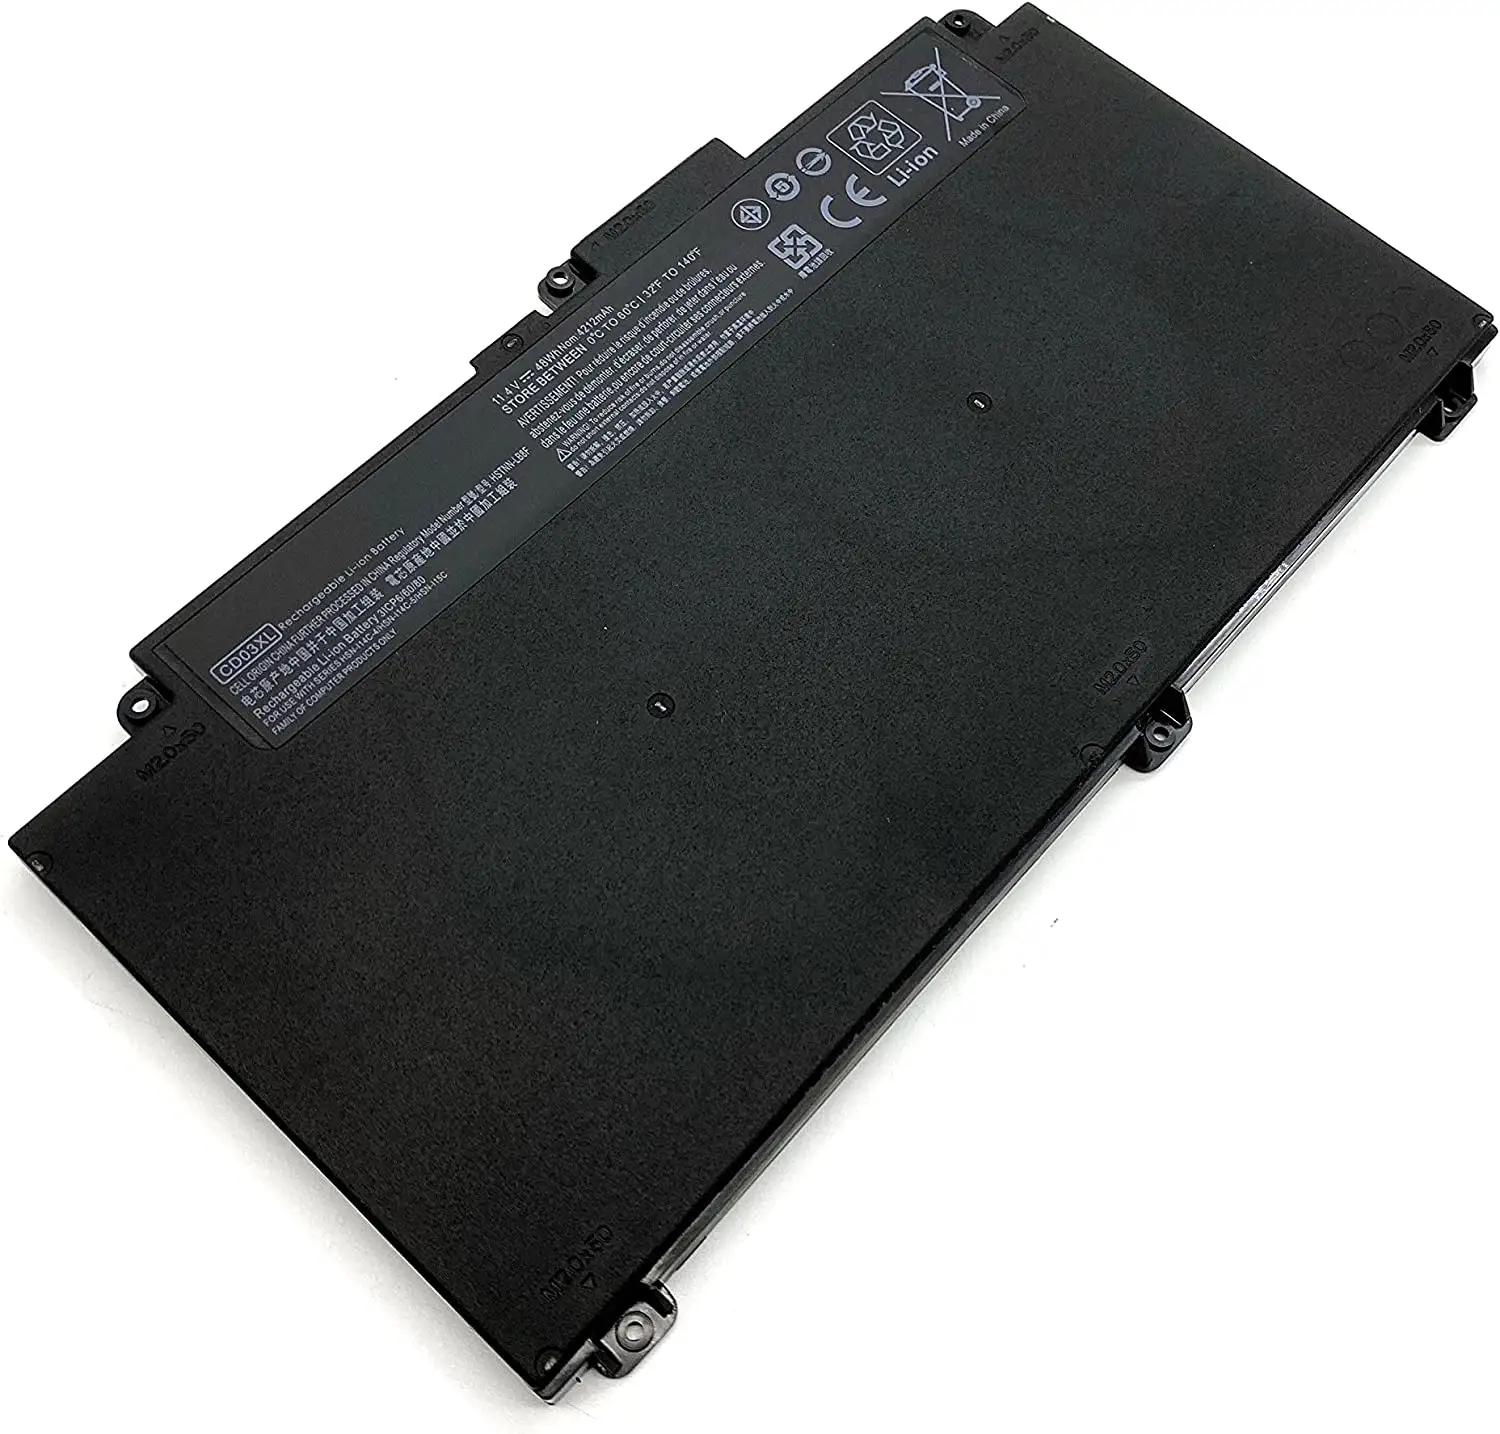 11.4V 48Wh CD03XL Laptop Battery Compatible with HP ProBook 640 645 650 G4 G5 650 G7 Series Notebook Battery